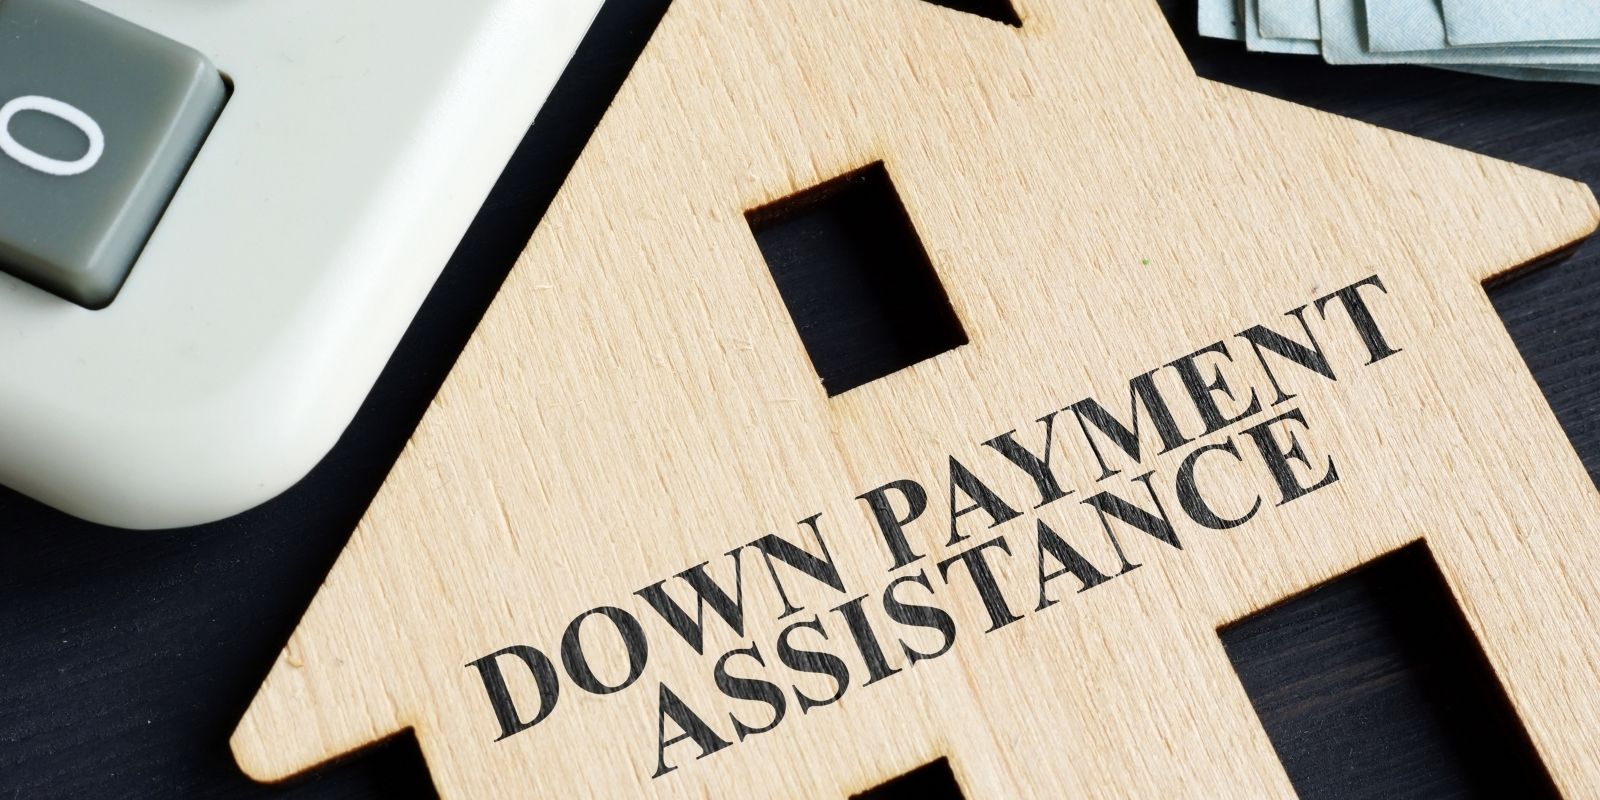 Texas Down Payment Assistance Programs & Resources